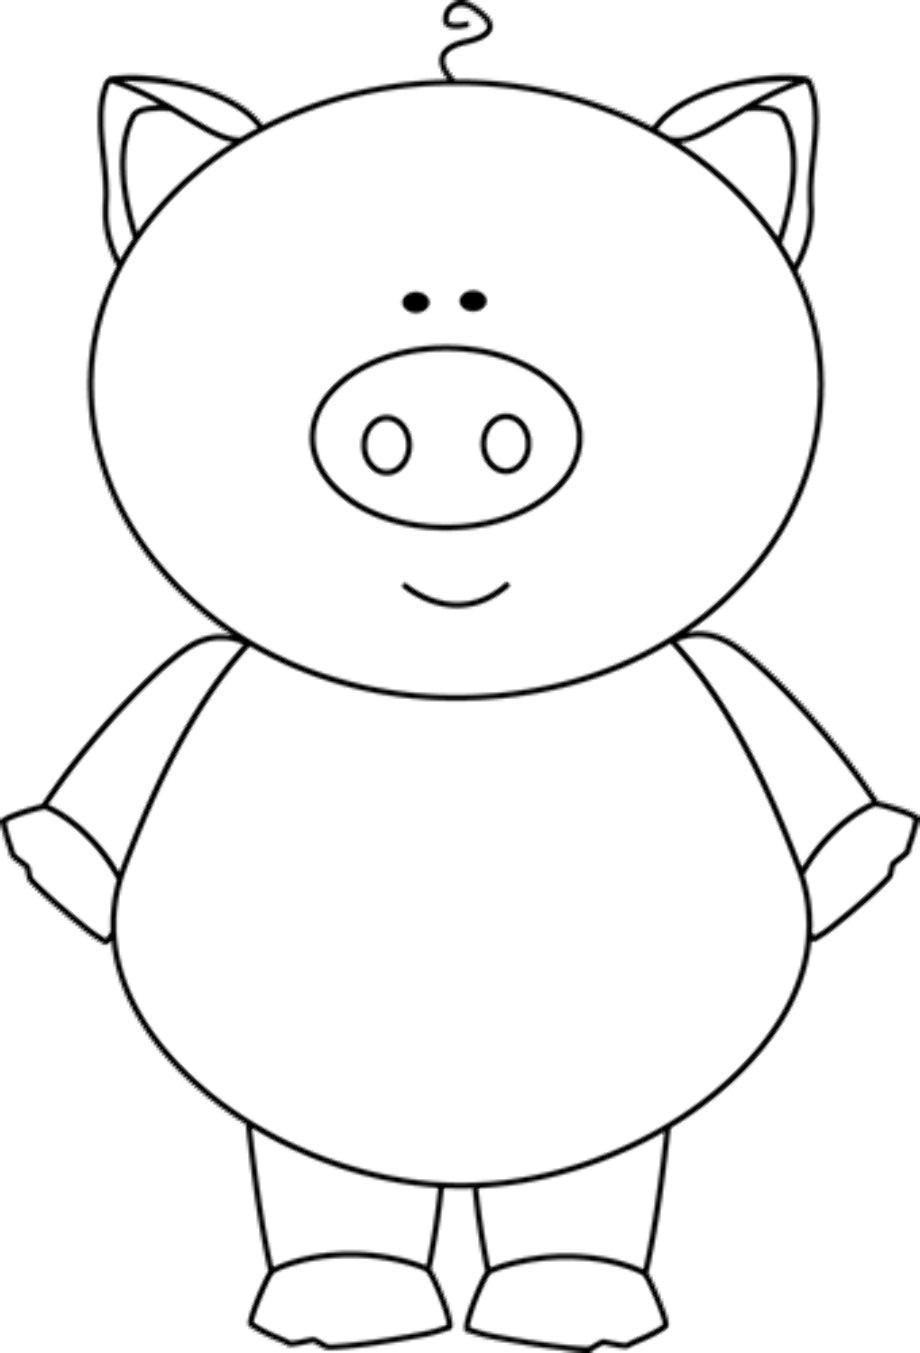 Download High Quality pig clipart black and white standing up